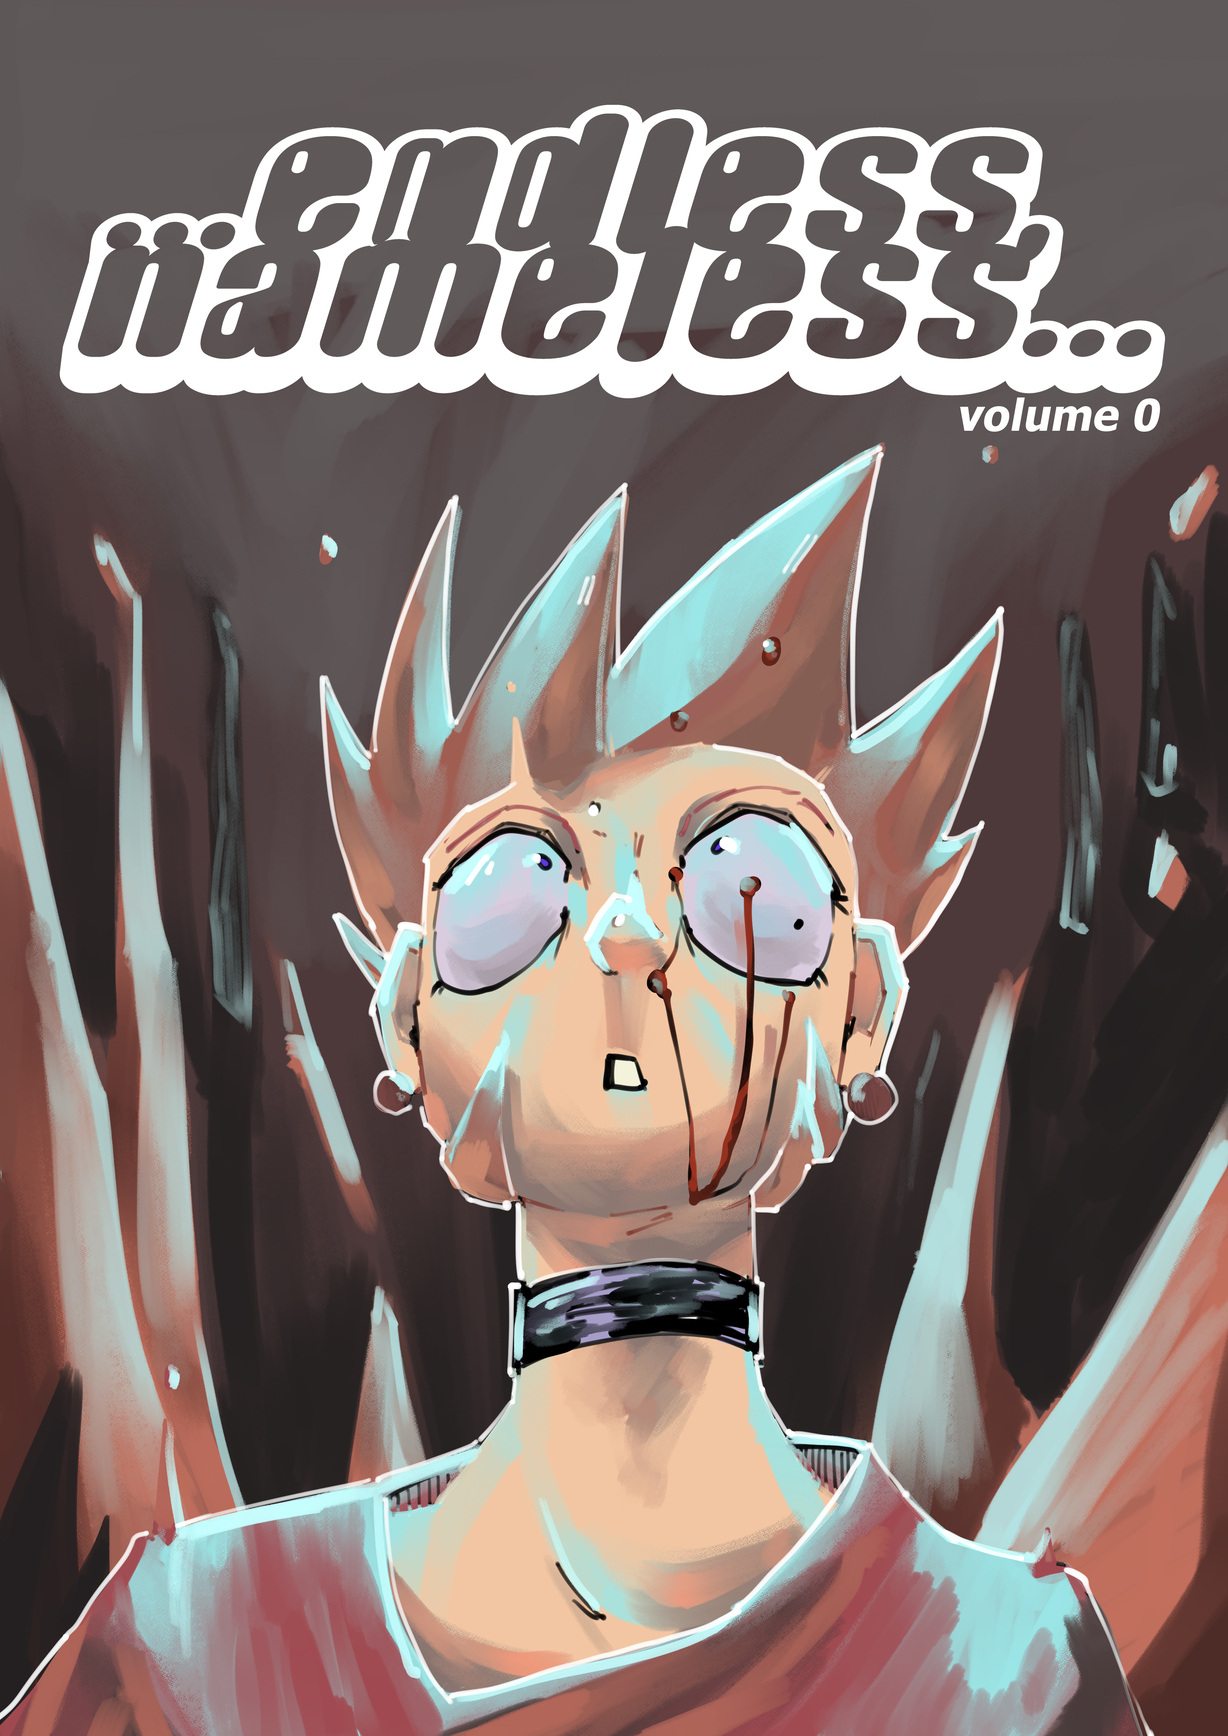 cover art for volume 0 of the webcomic endless, nameless. the main character is pictured staring up at something, with their hair blown upwards and blood flying up from their bleeding nose.